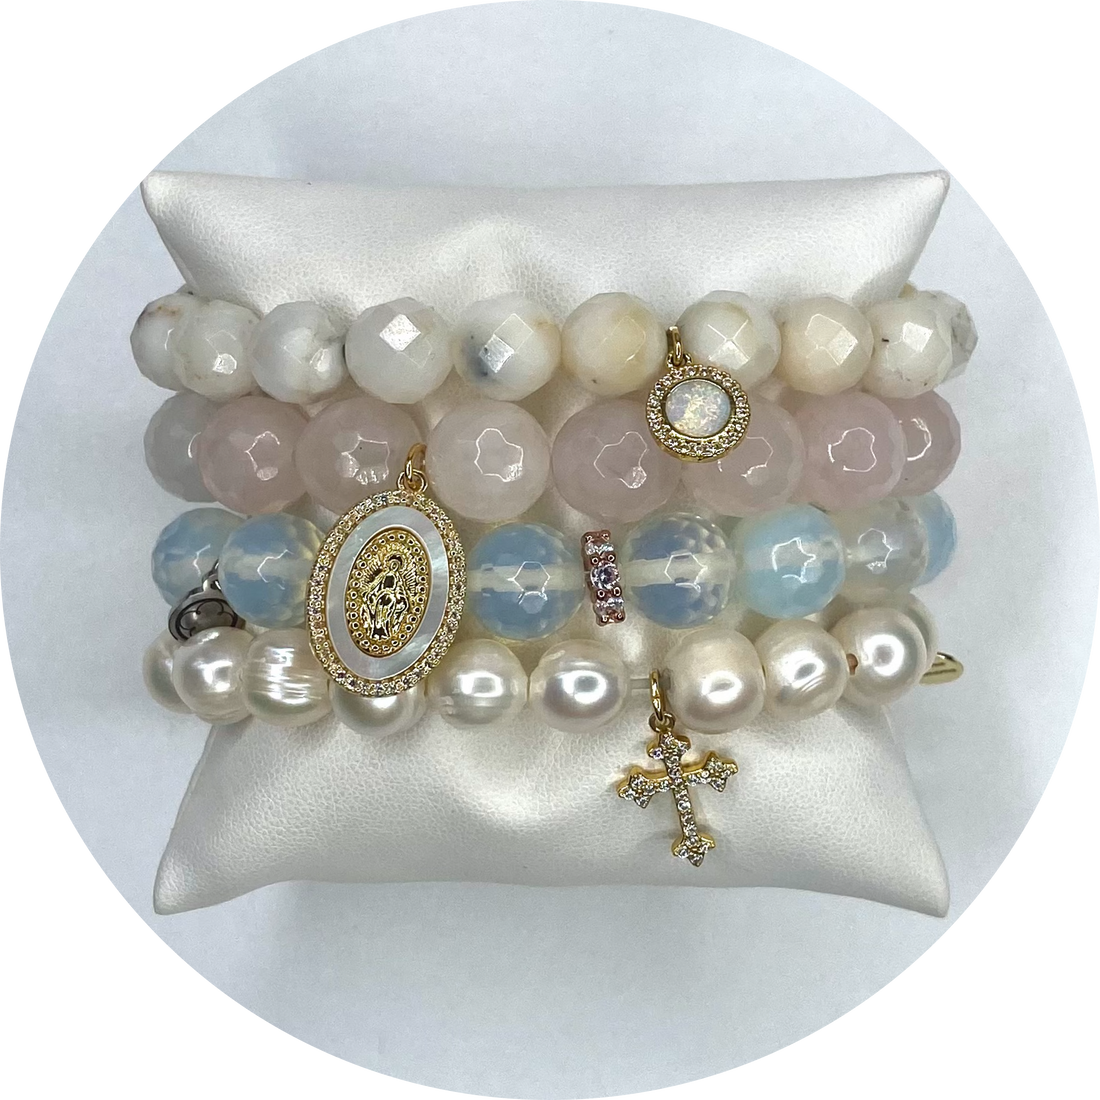 Fairy Godmother Armparty